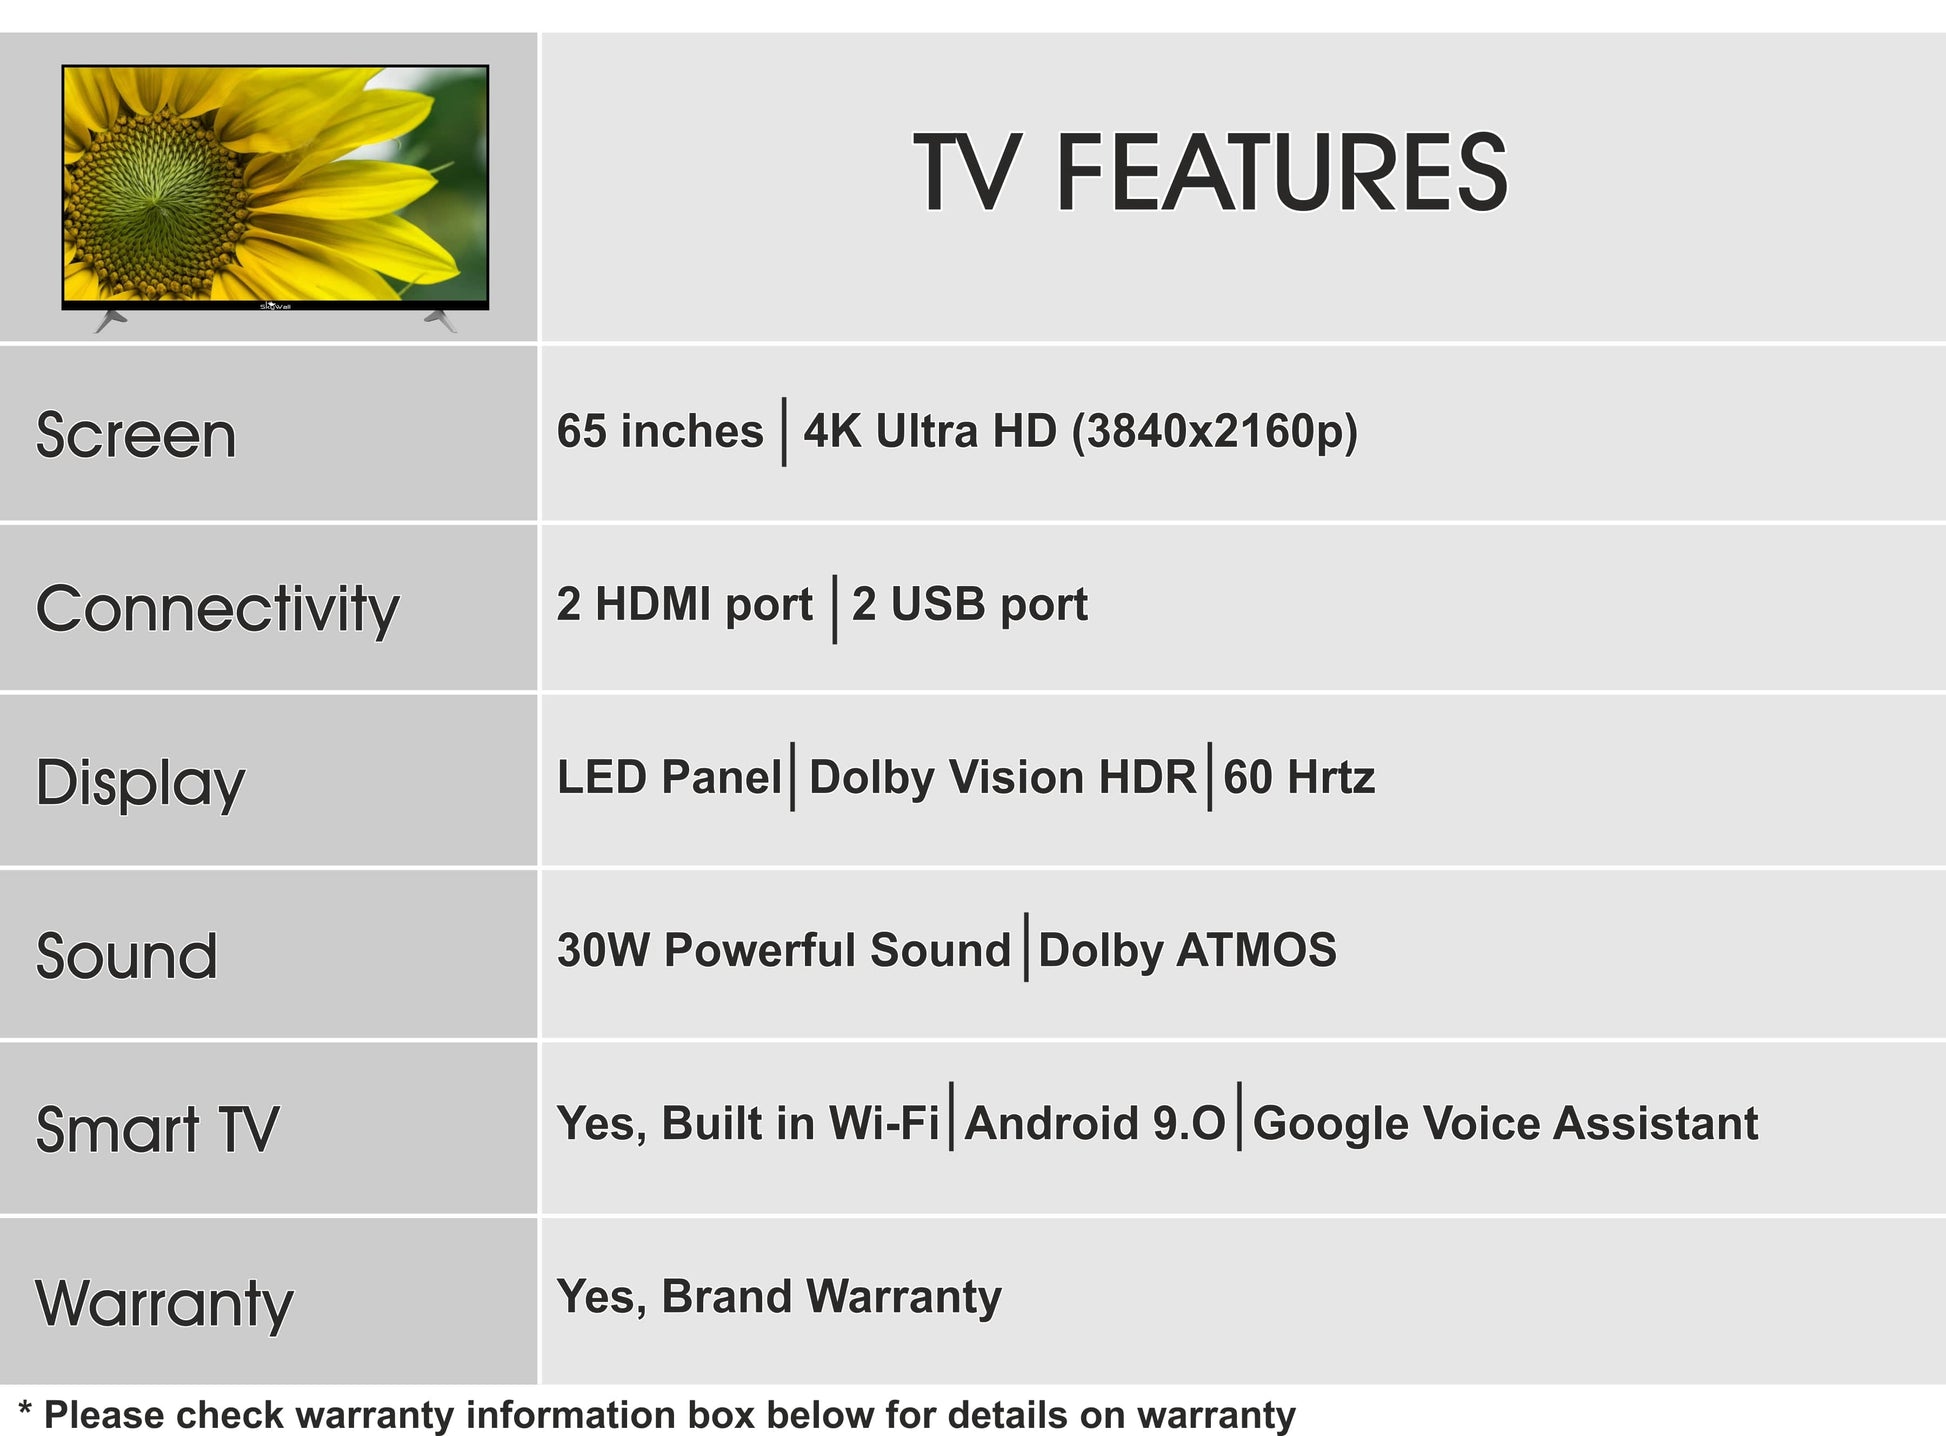 SkyWall™ TV 4K Ultra HD TV SkyWall 165 cm (65 inches) 4K Ultra HD Smart Android LED TV 65SW4K-Voice | Built-in Google Assistant